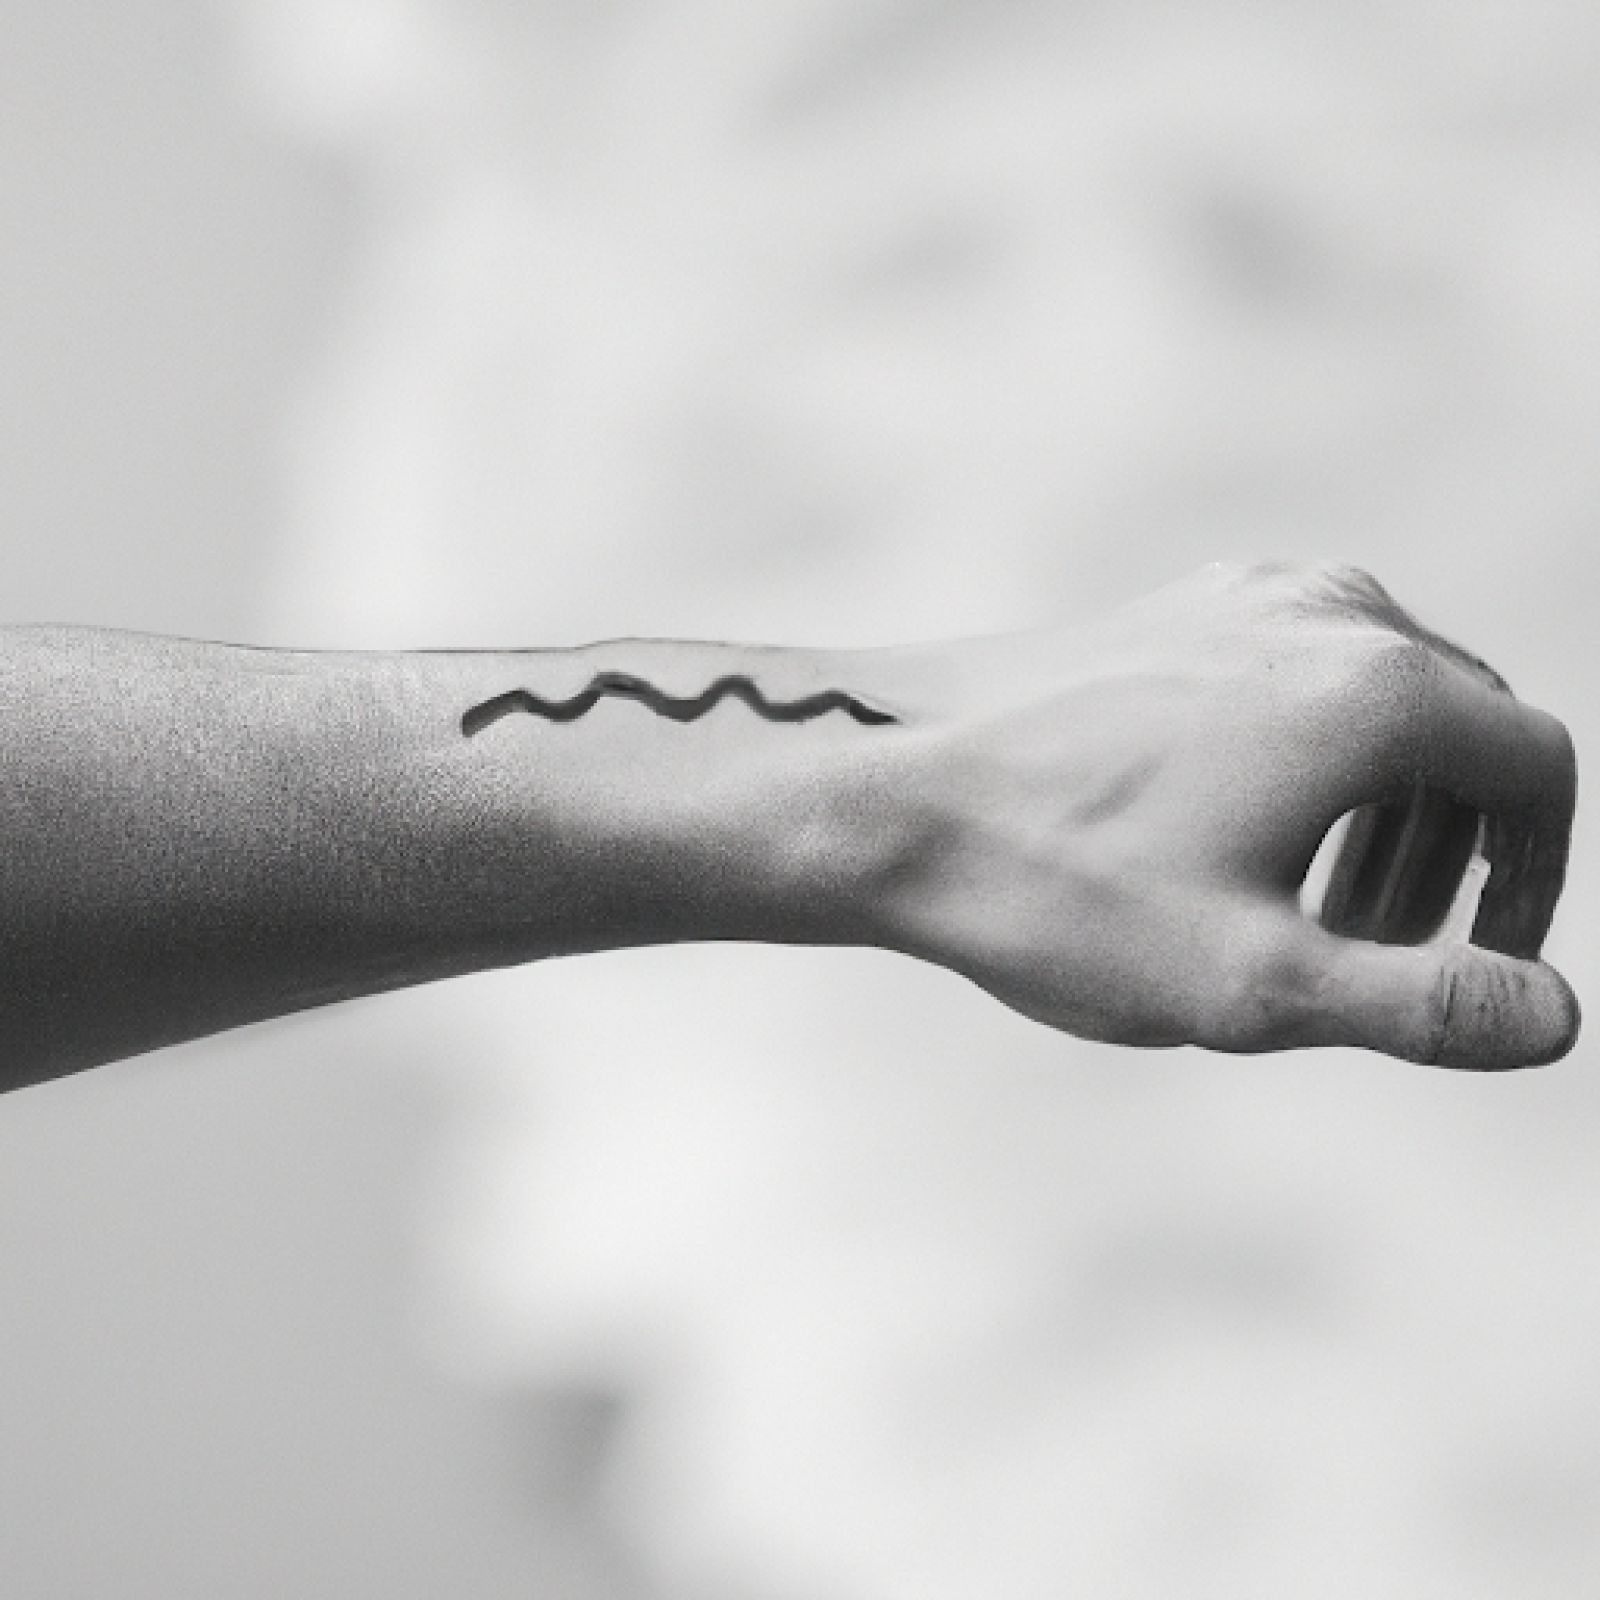 Wave tattoo on wrist for men